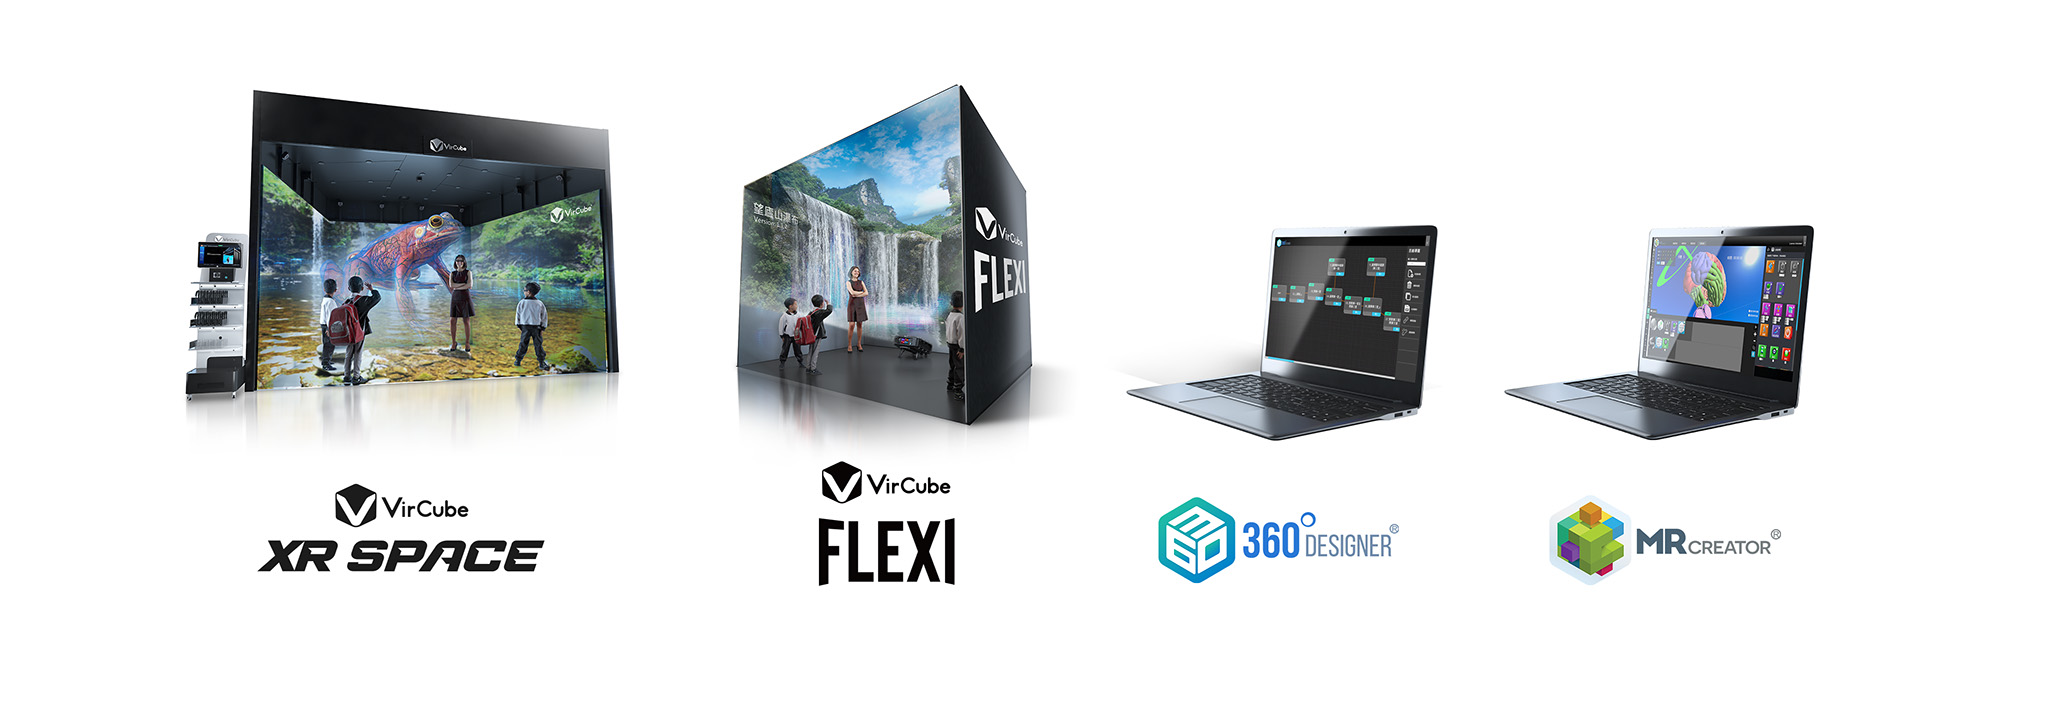 VirCube Products for Education